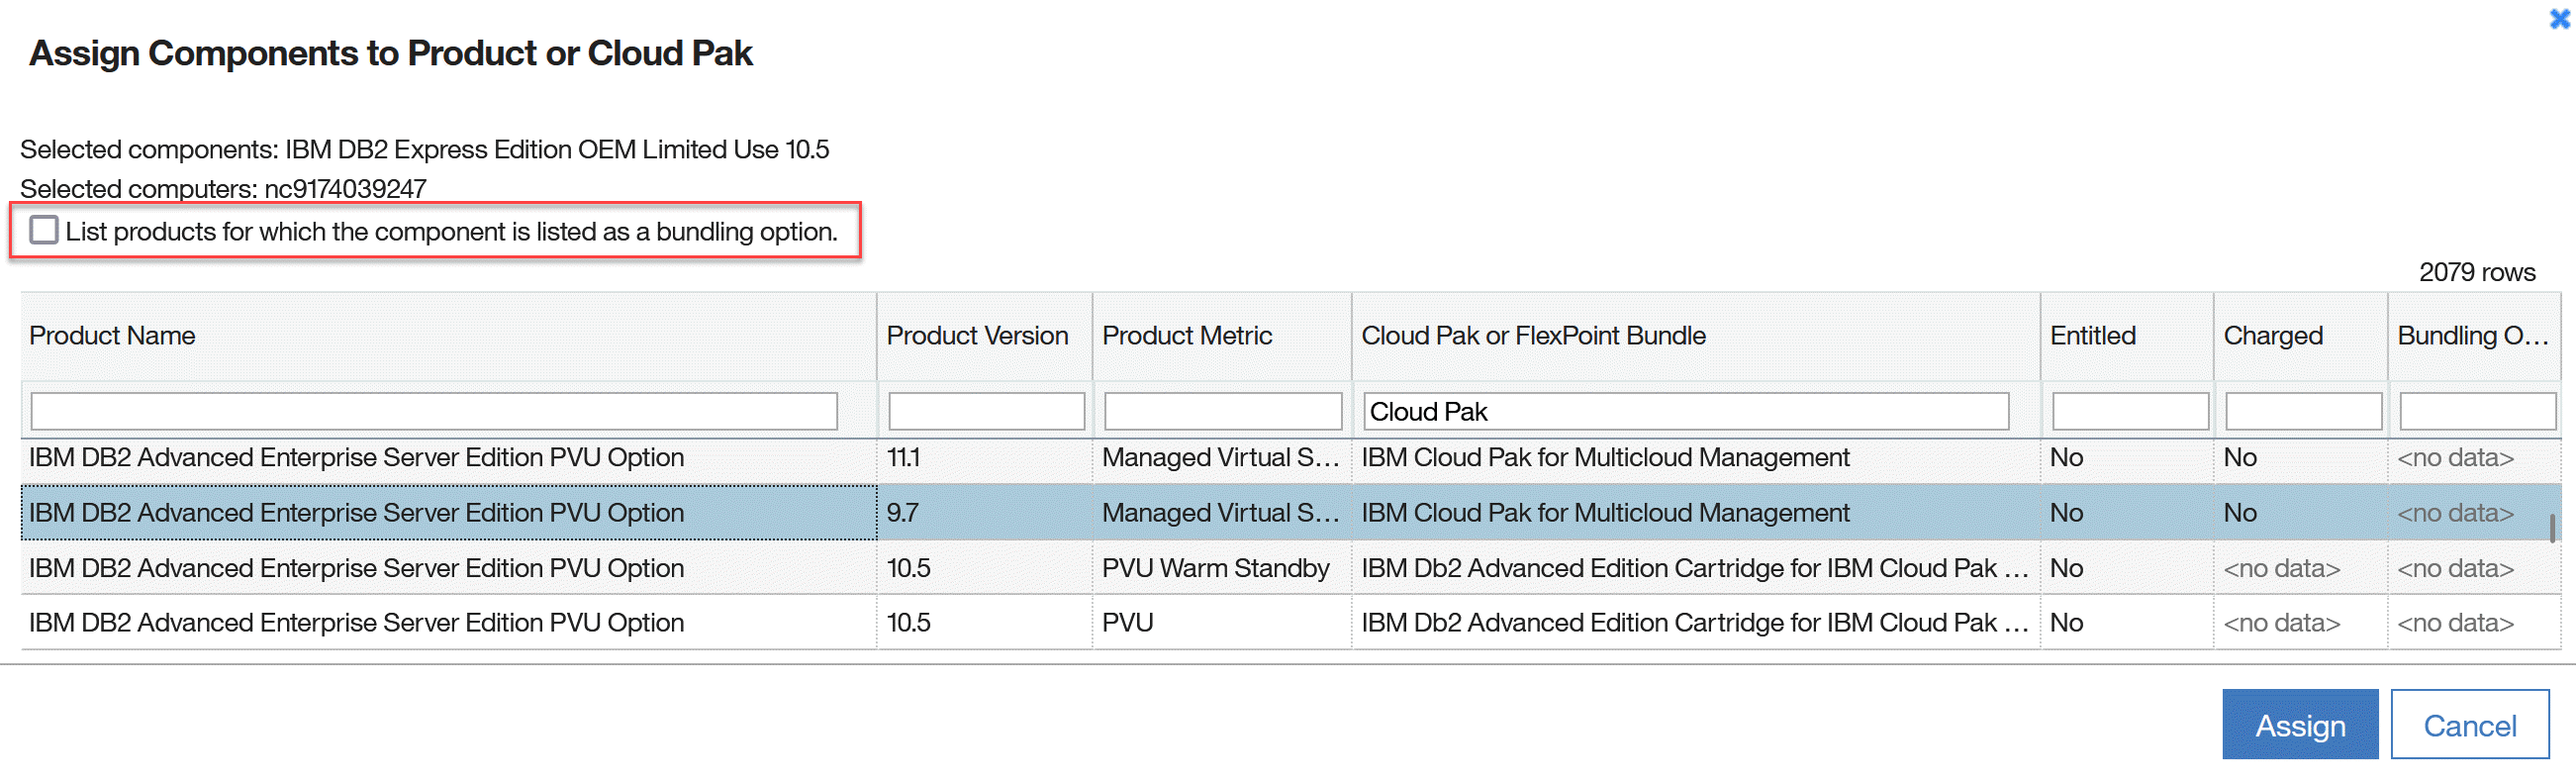 Assigning a component to a product, metric and CloudPak